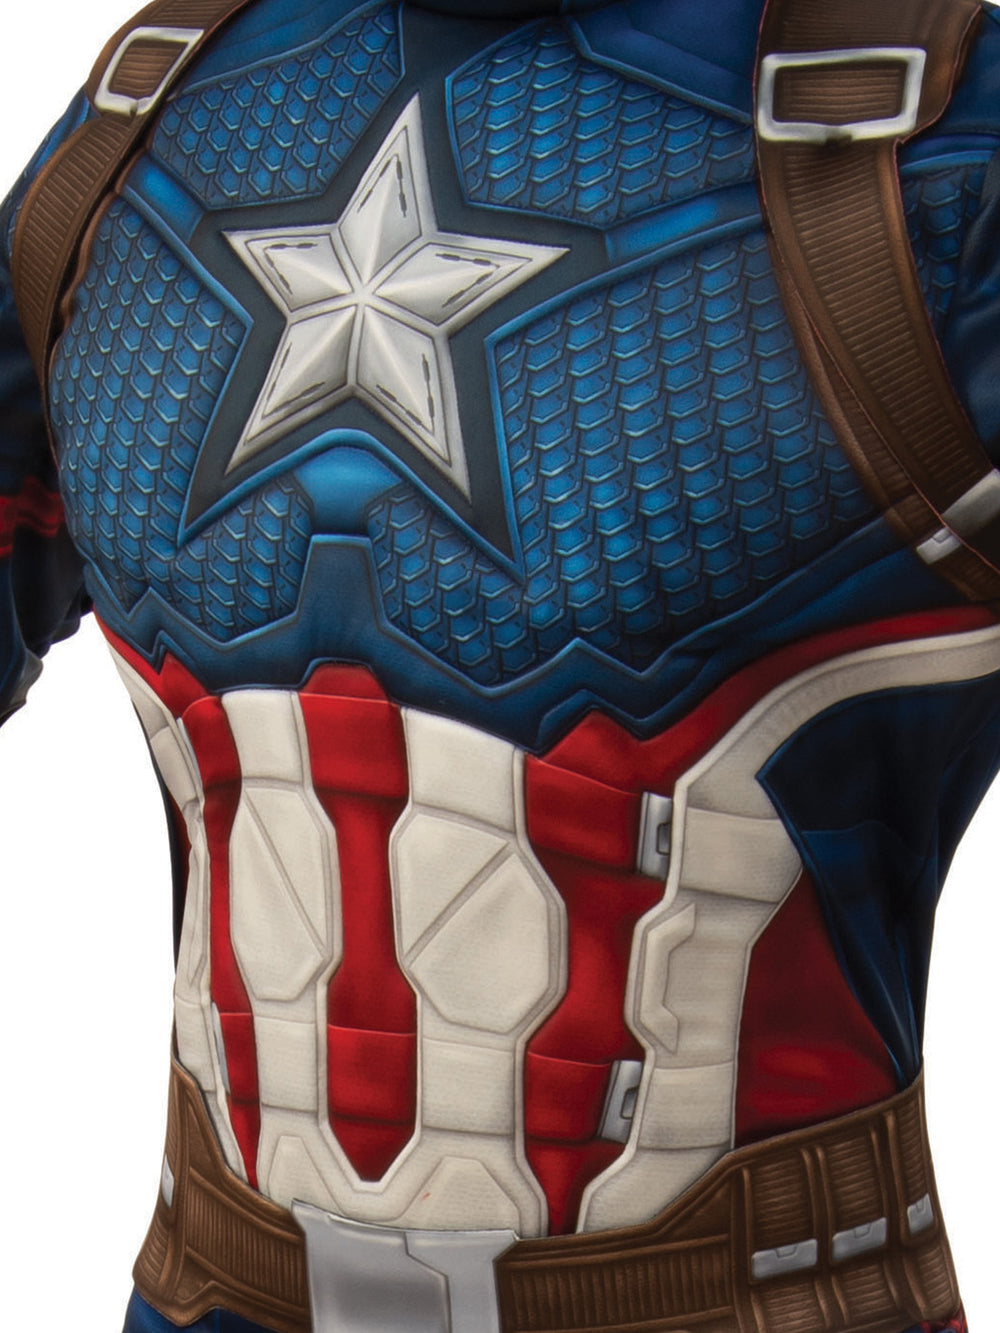 CAPTAIN AMERICA DELUXE COSTUME, ADULT - Little Shop of Horrors